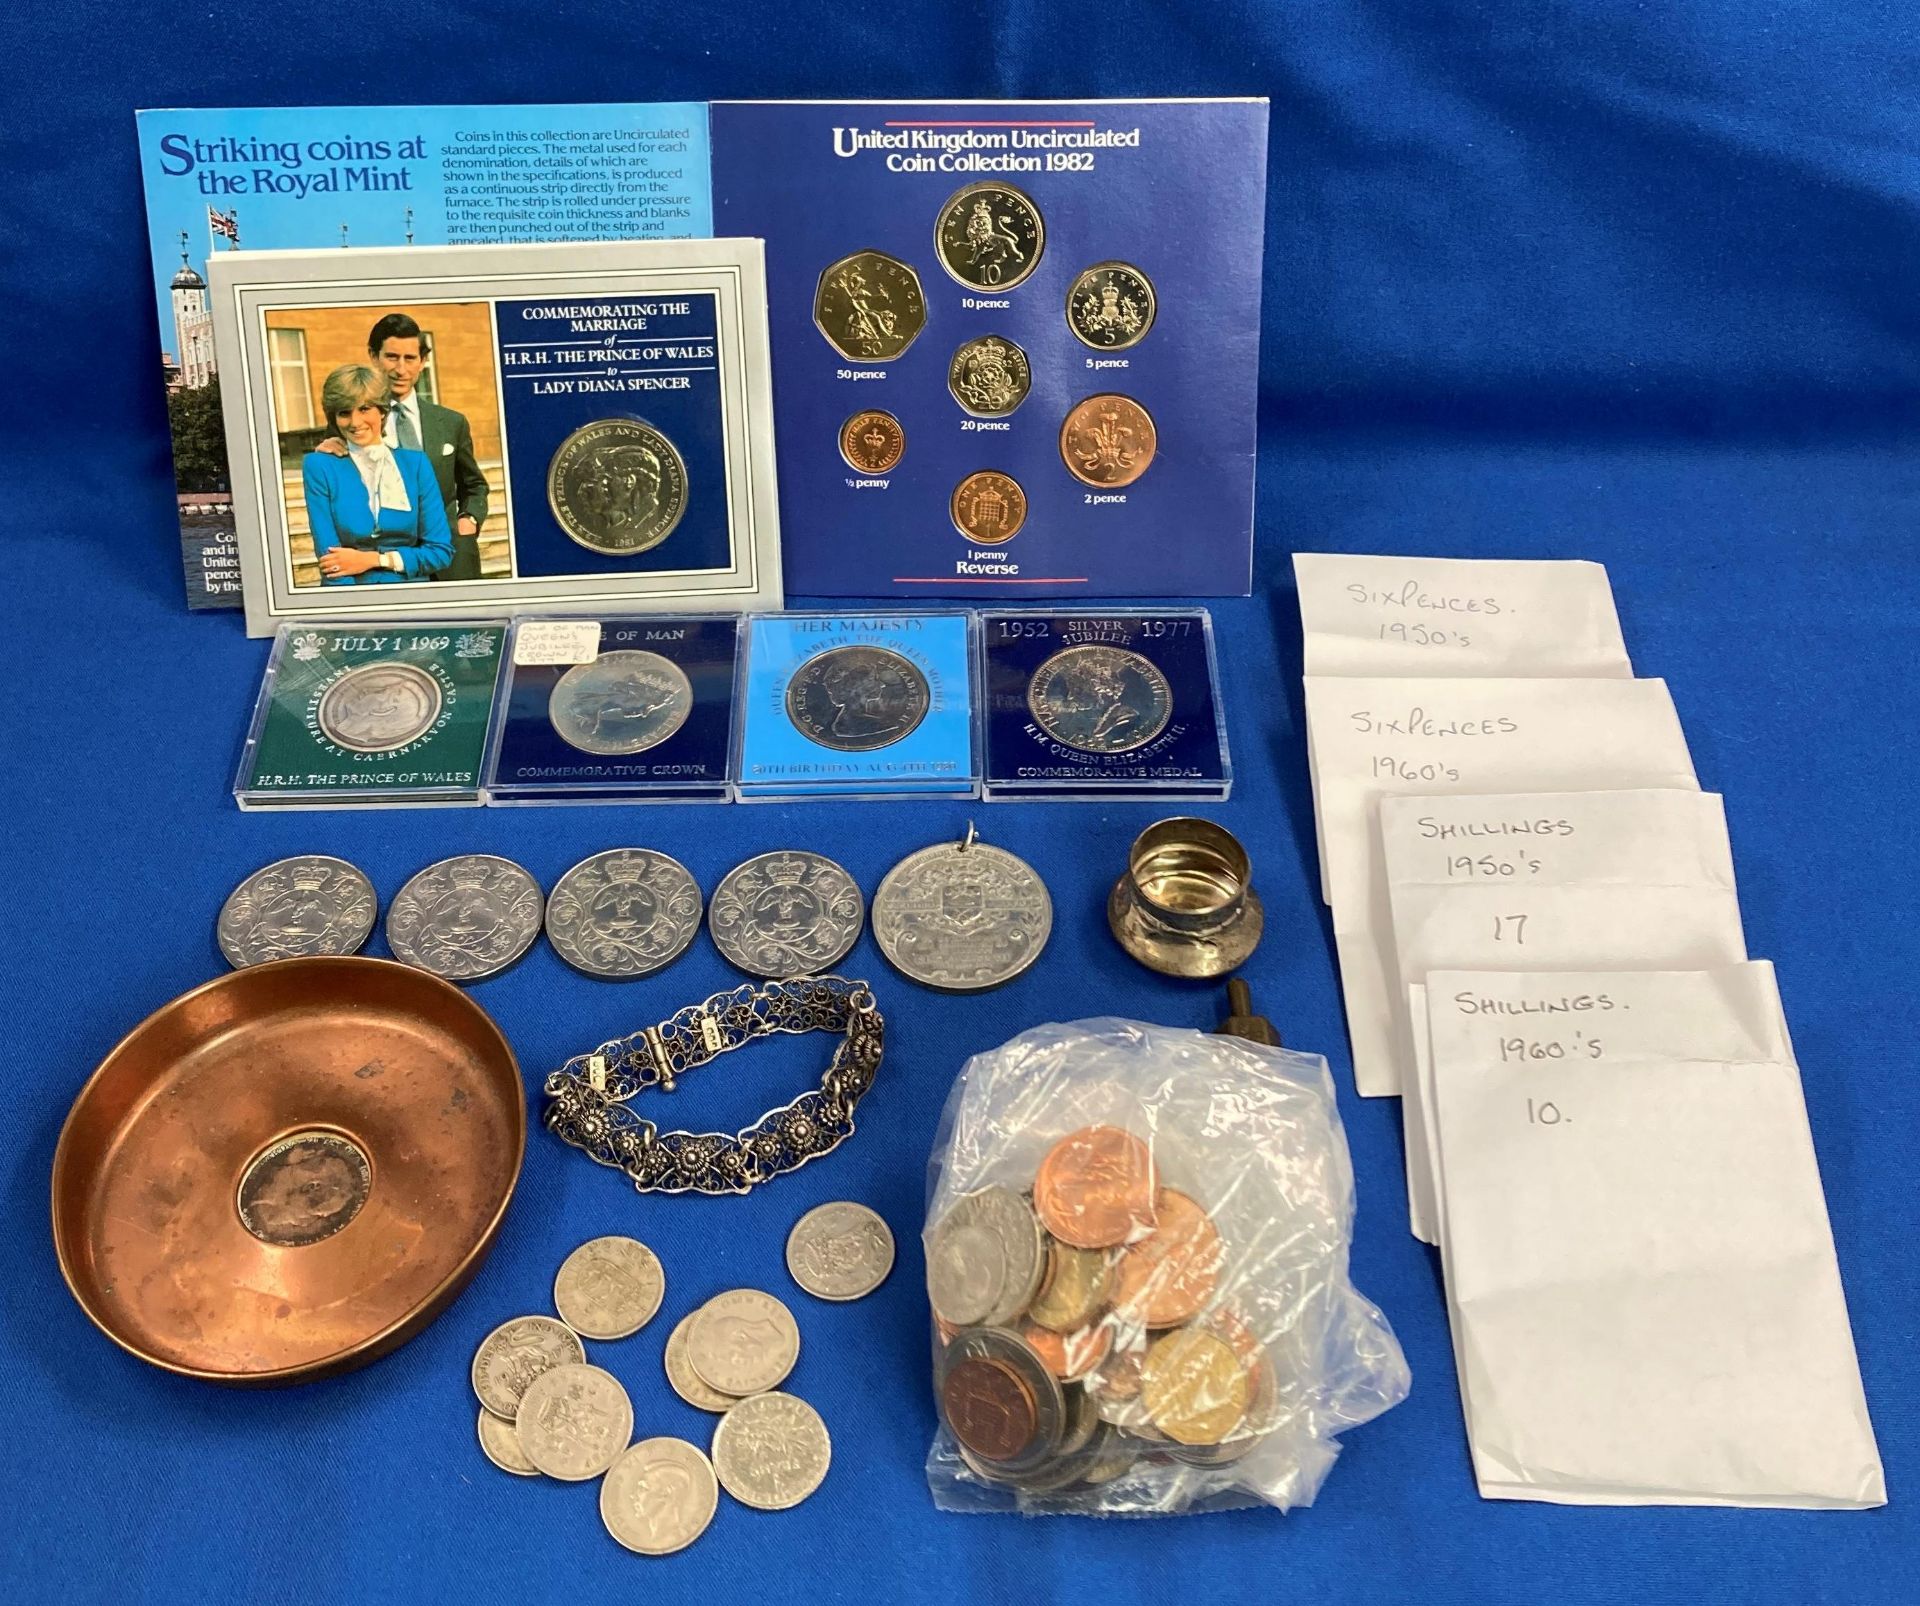 Contents to tray - assorted coins including Six Pence pieces, Shillings, Crowns, 1982 uncirculated,